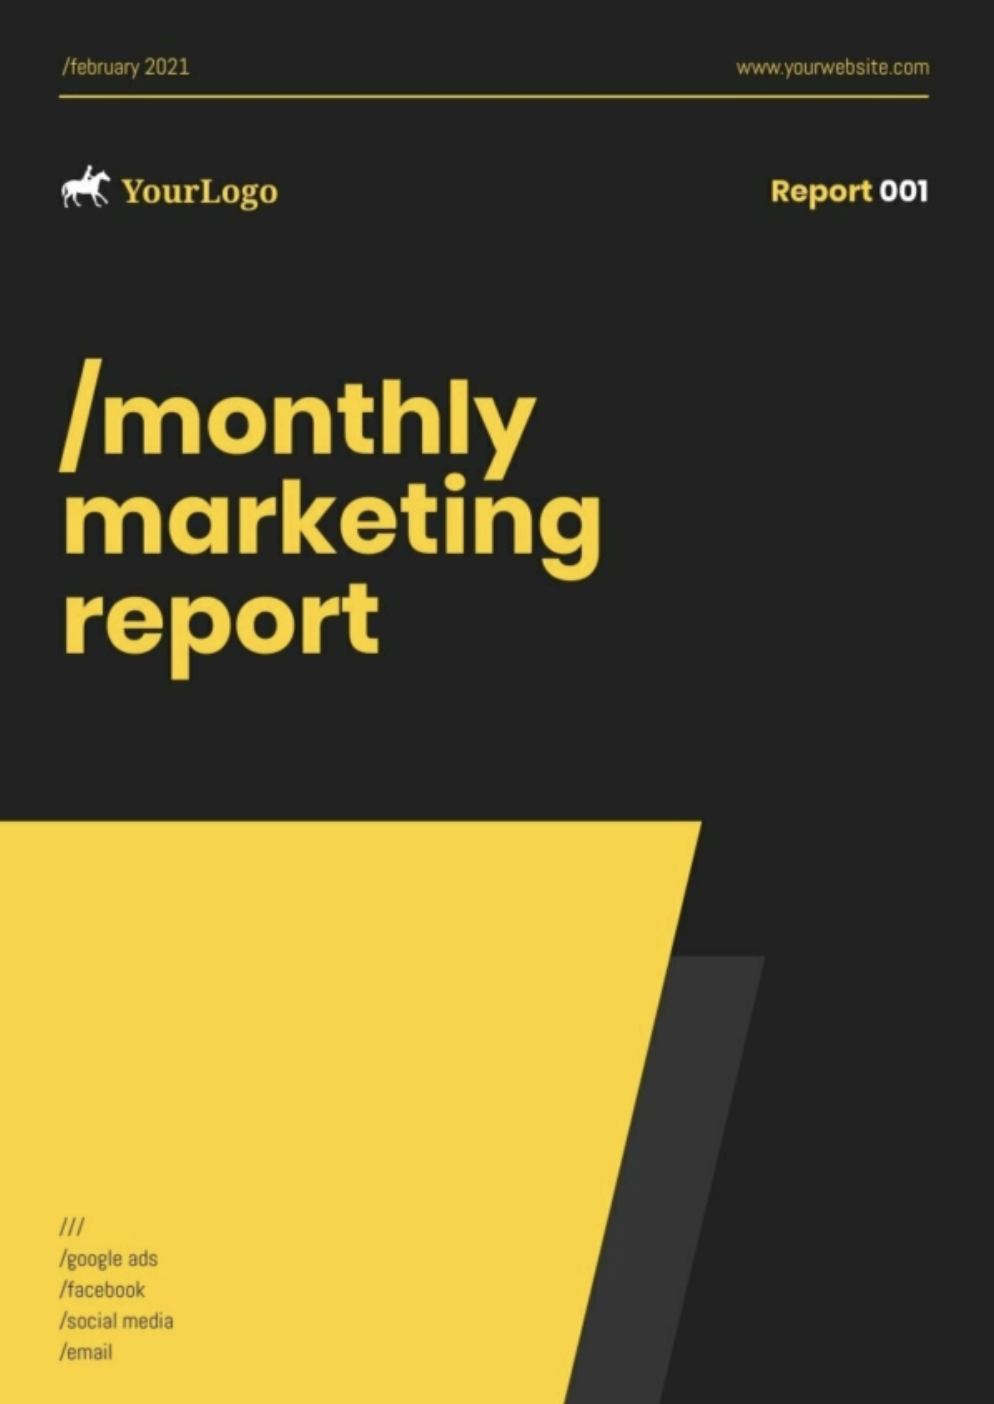 Monthly Marketing Report